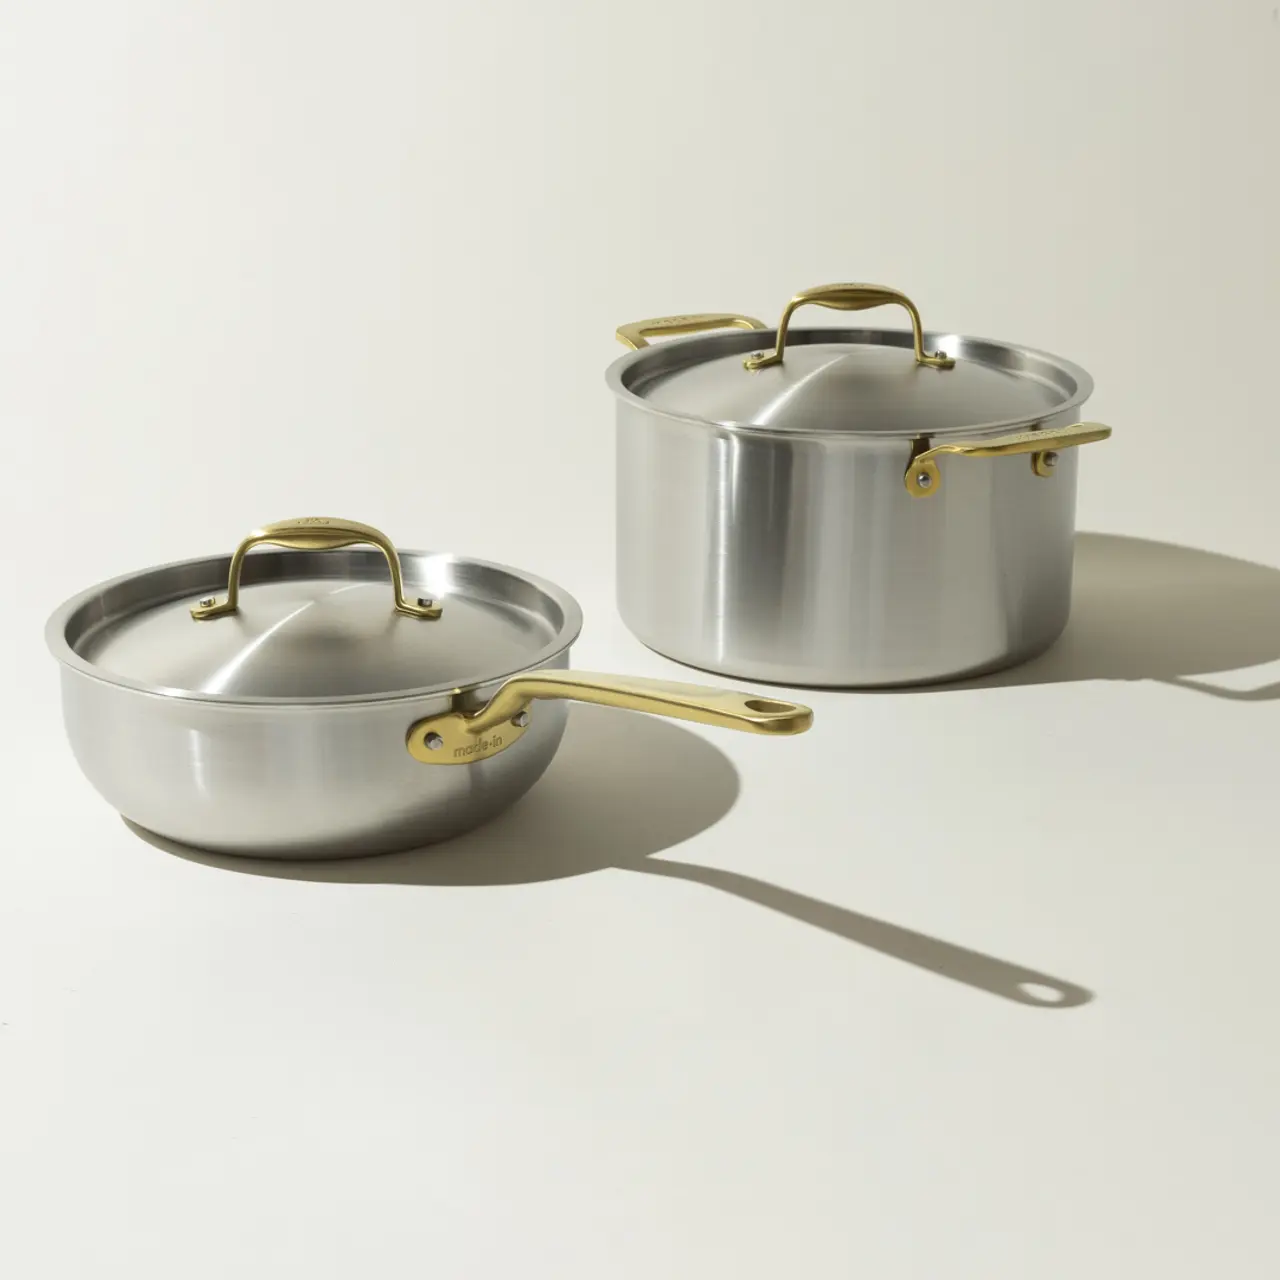 Two stainless steel pans with gold-colored handles cast shadows on a light background.